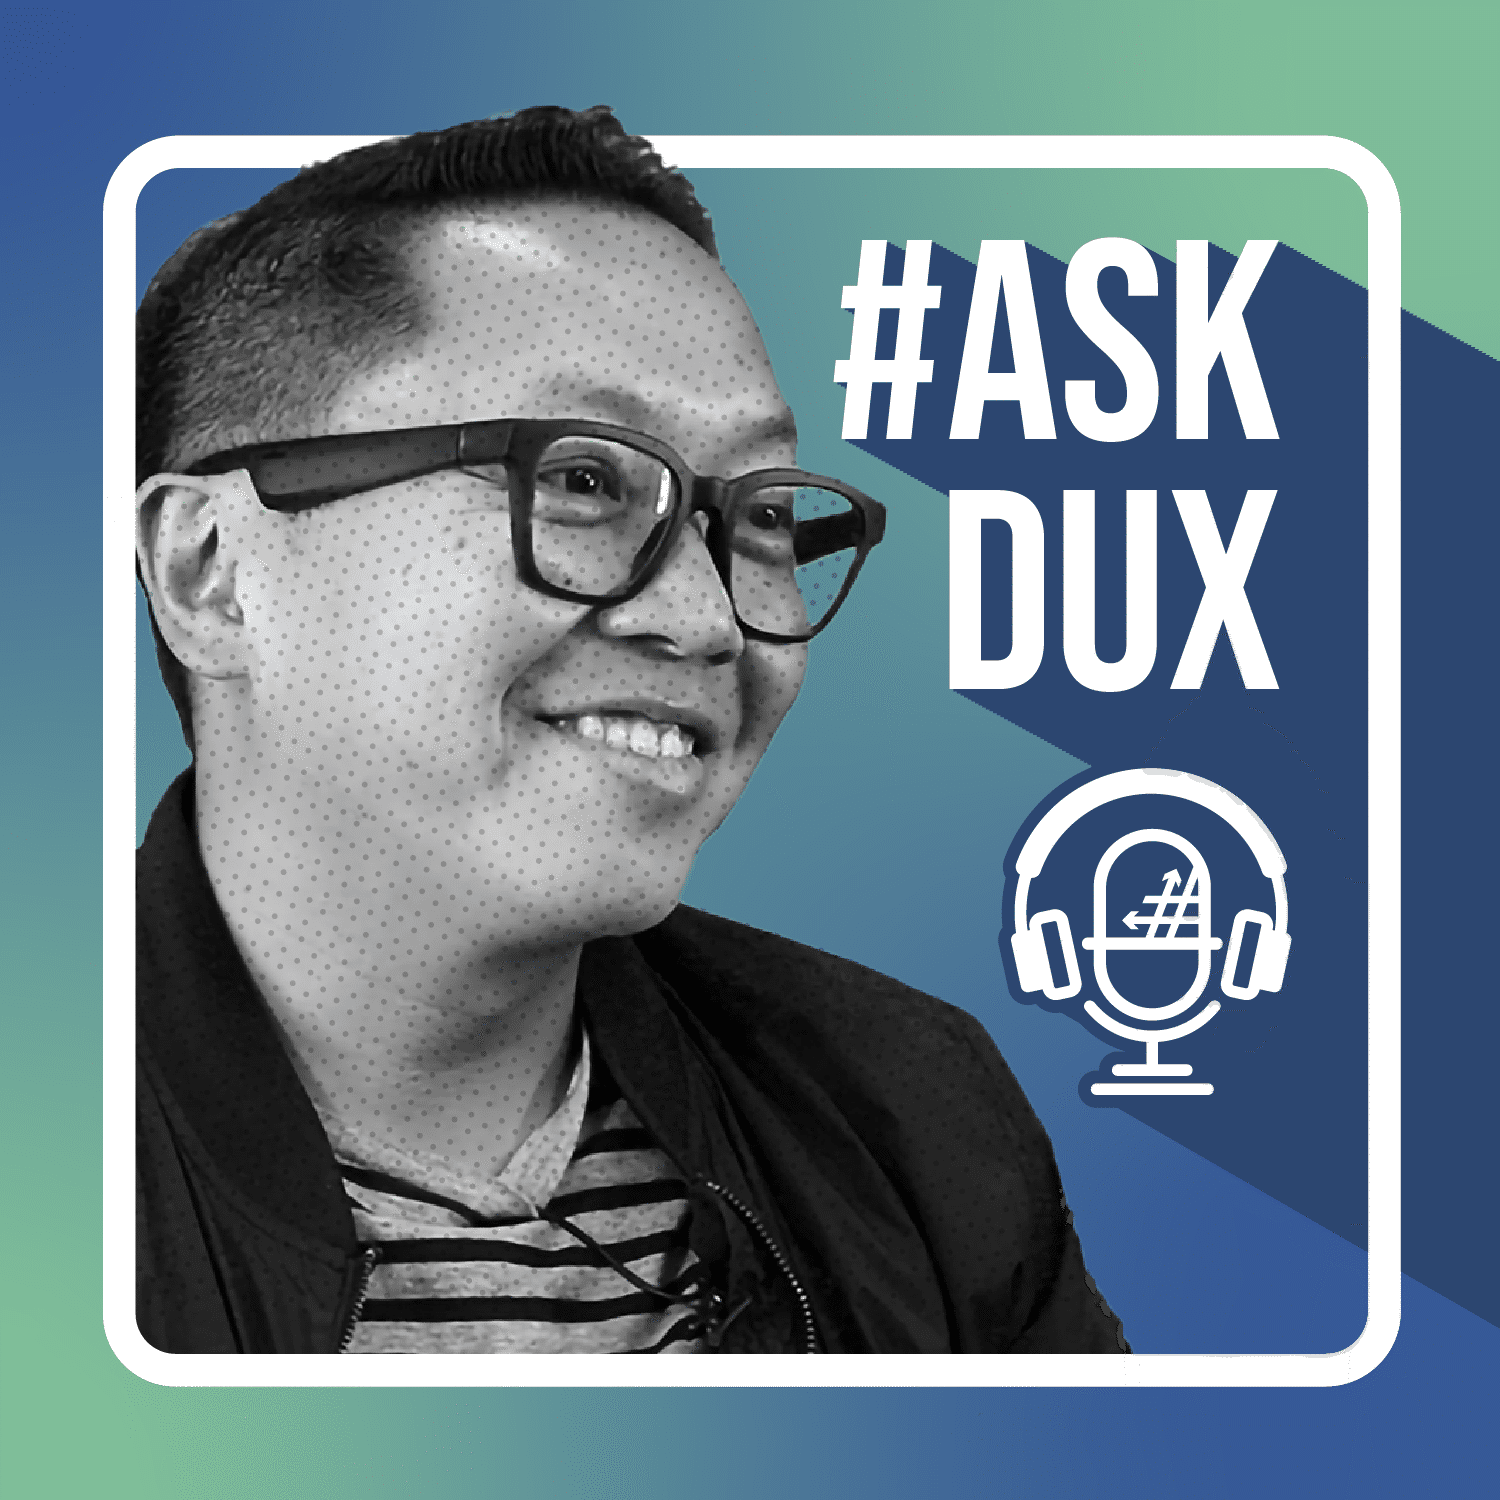 Ask Dux: How Can I Make Remote Learning Effective?